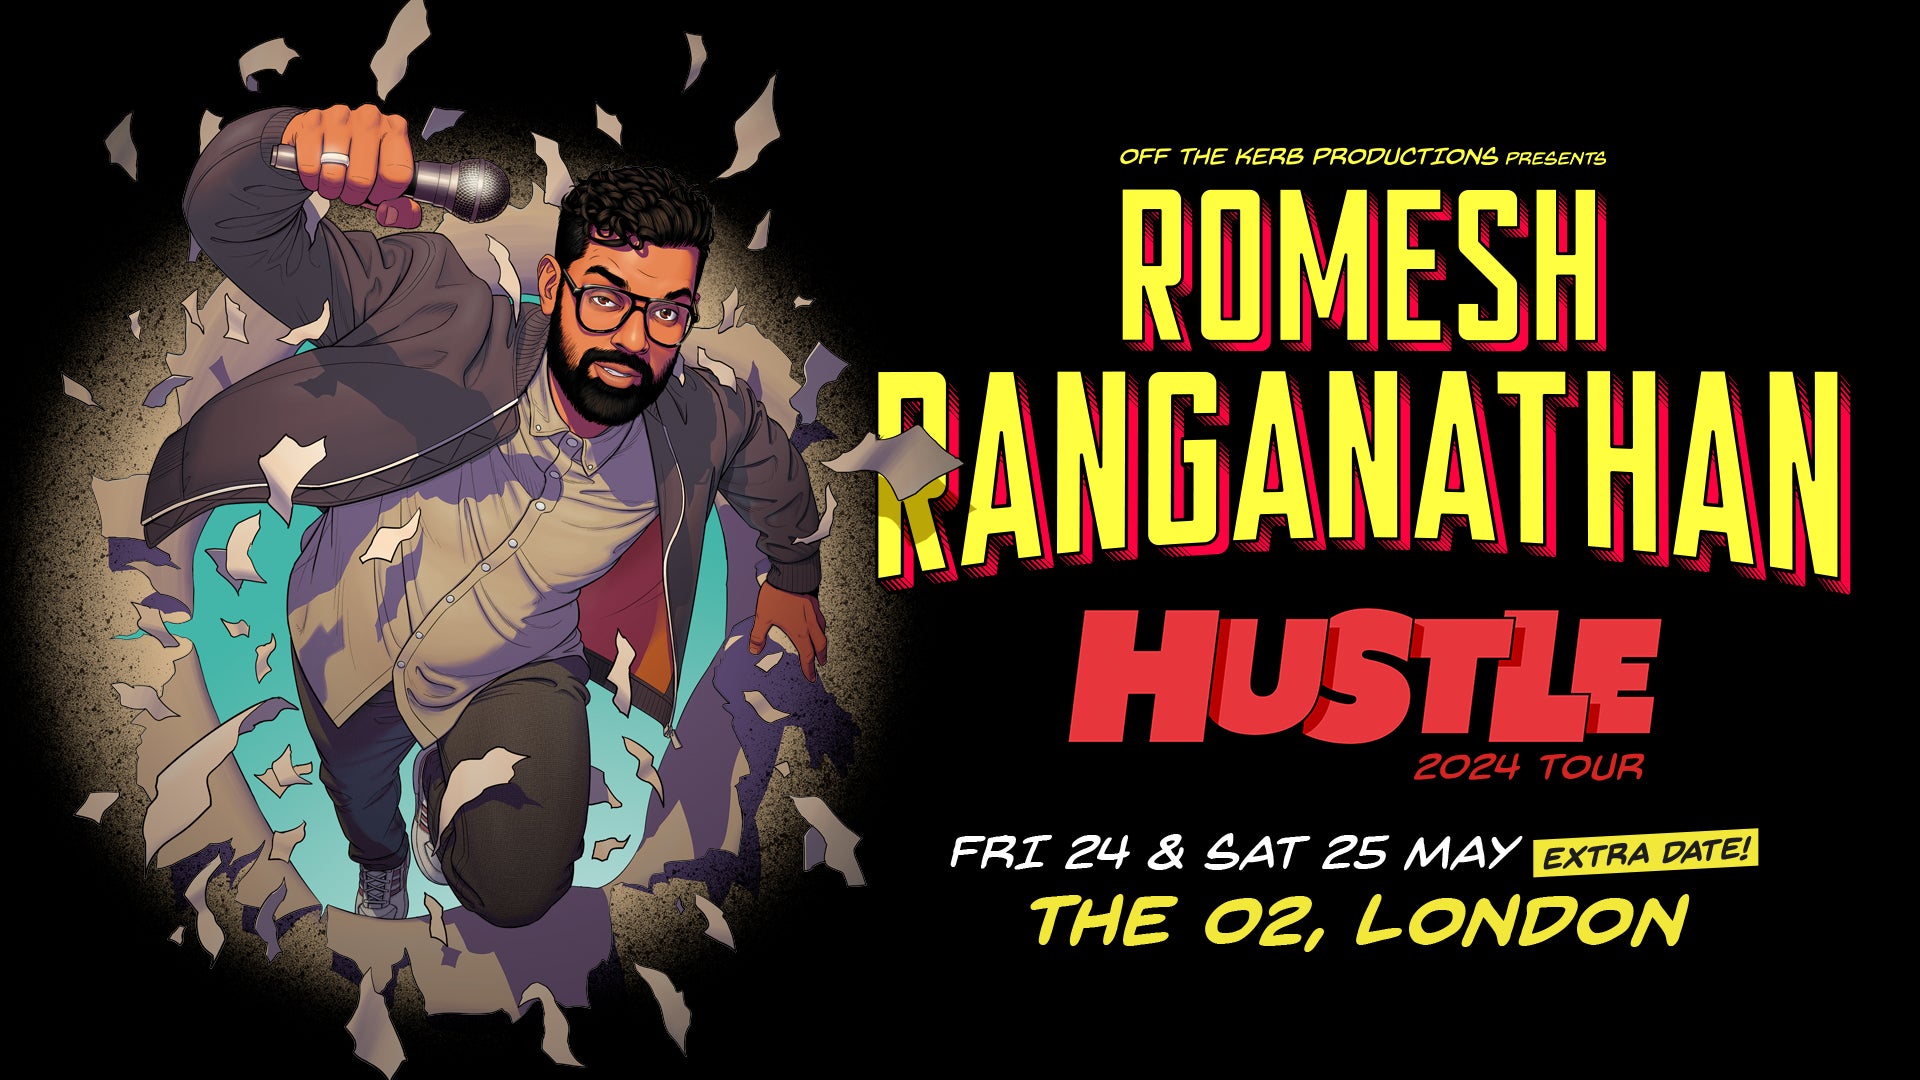  A colorful event poster featuring a comic-style illustration of Romesh Ranganathan breaking through a wall, for his 